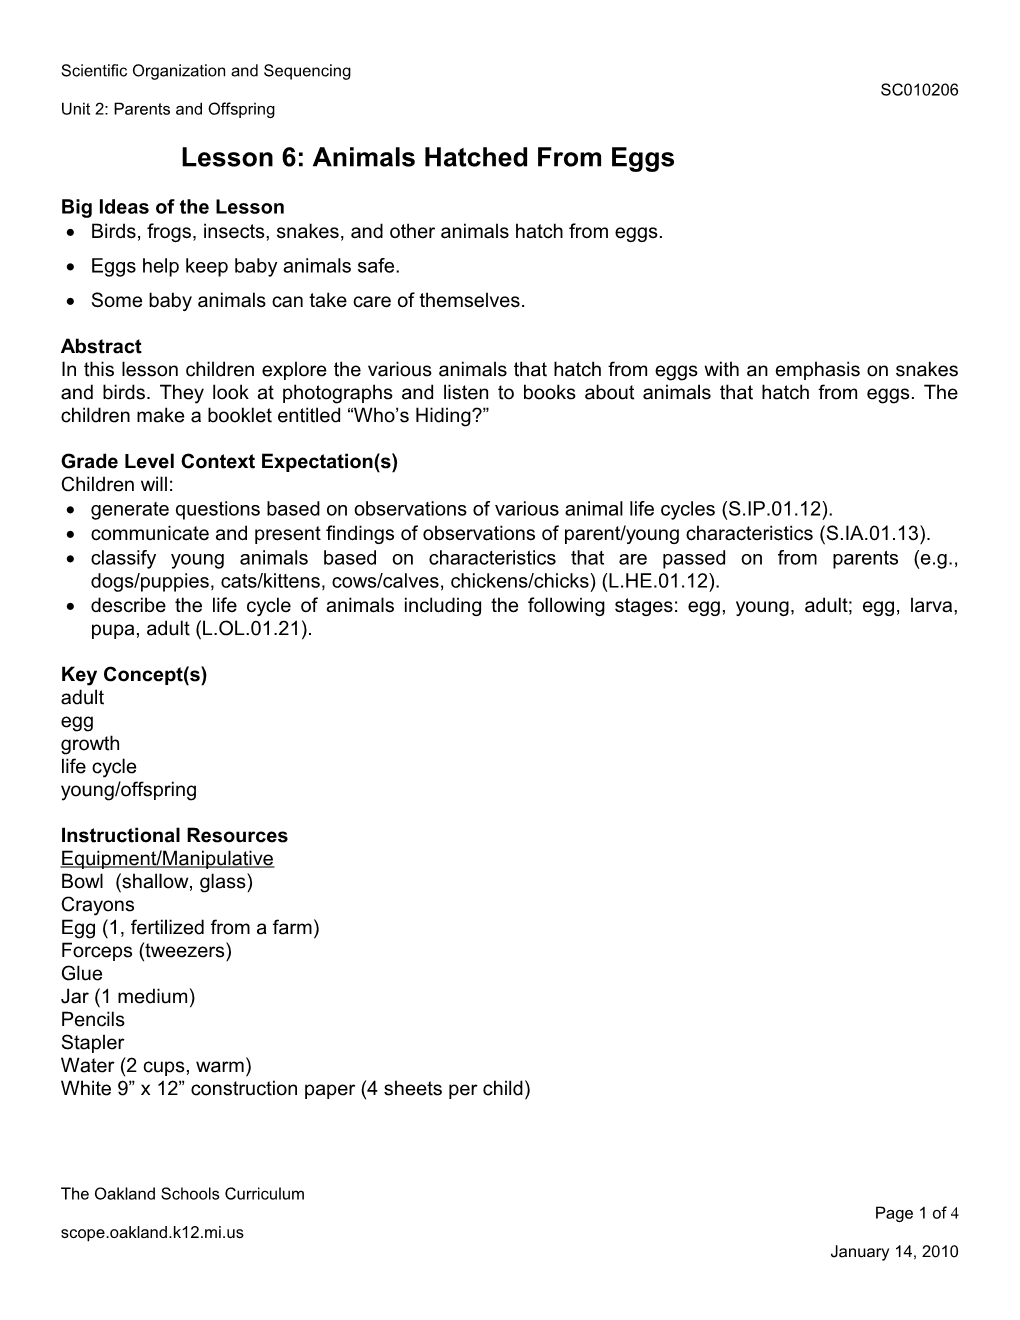 Lesson 6: Animals Hatched from Eggs